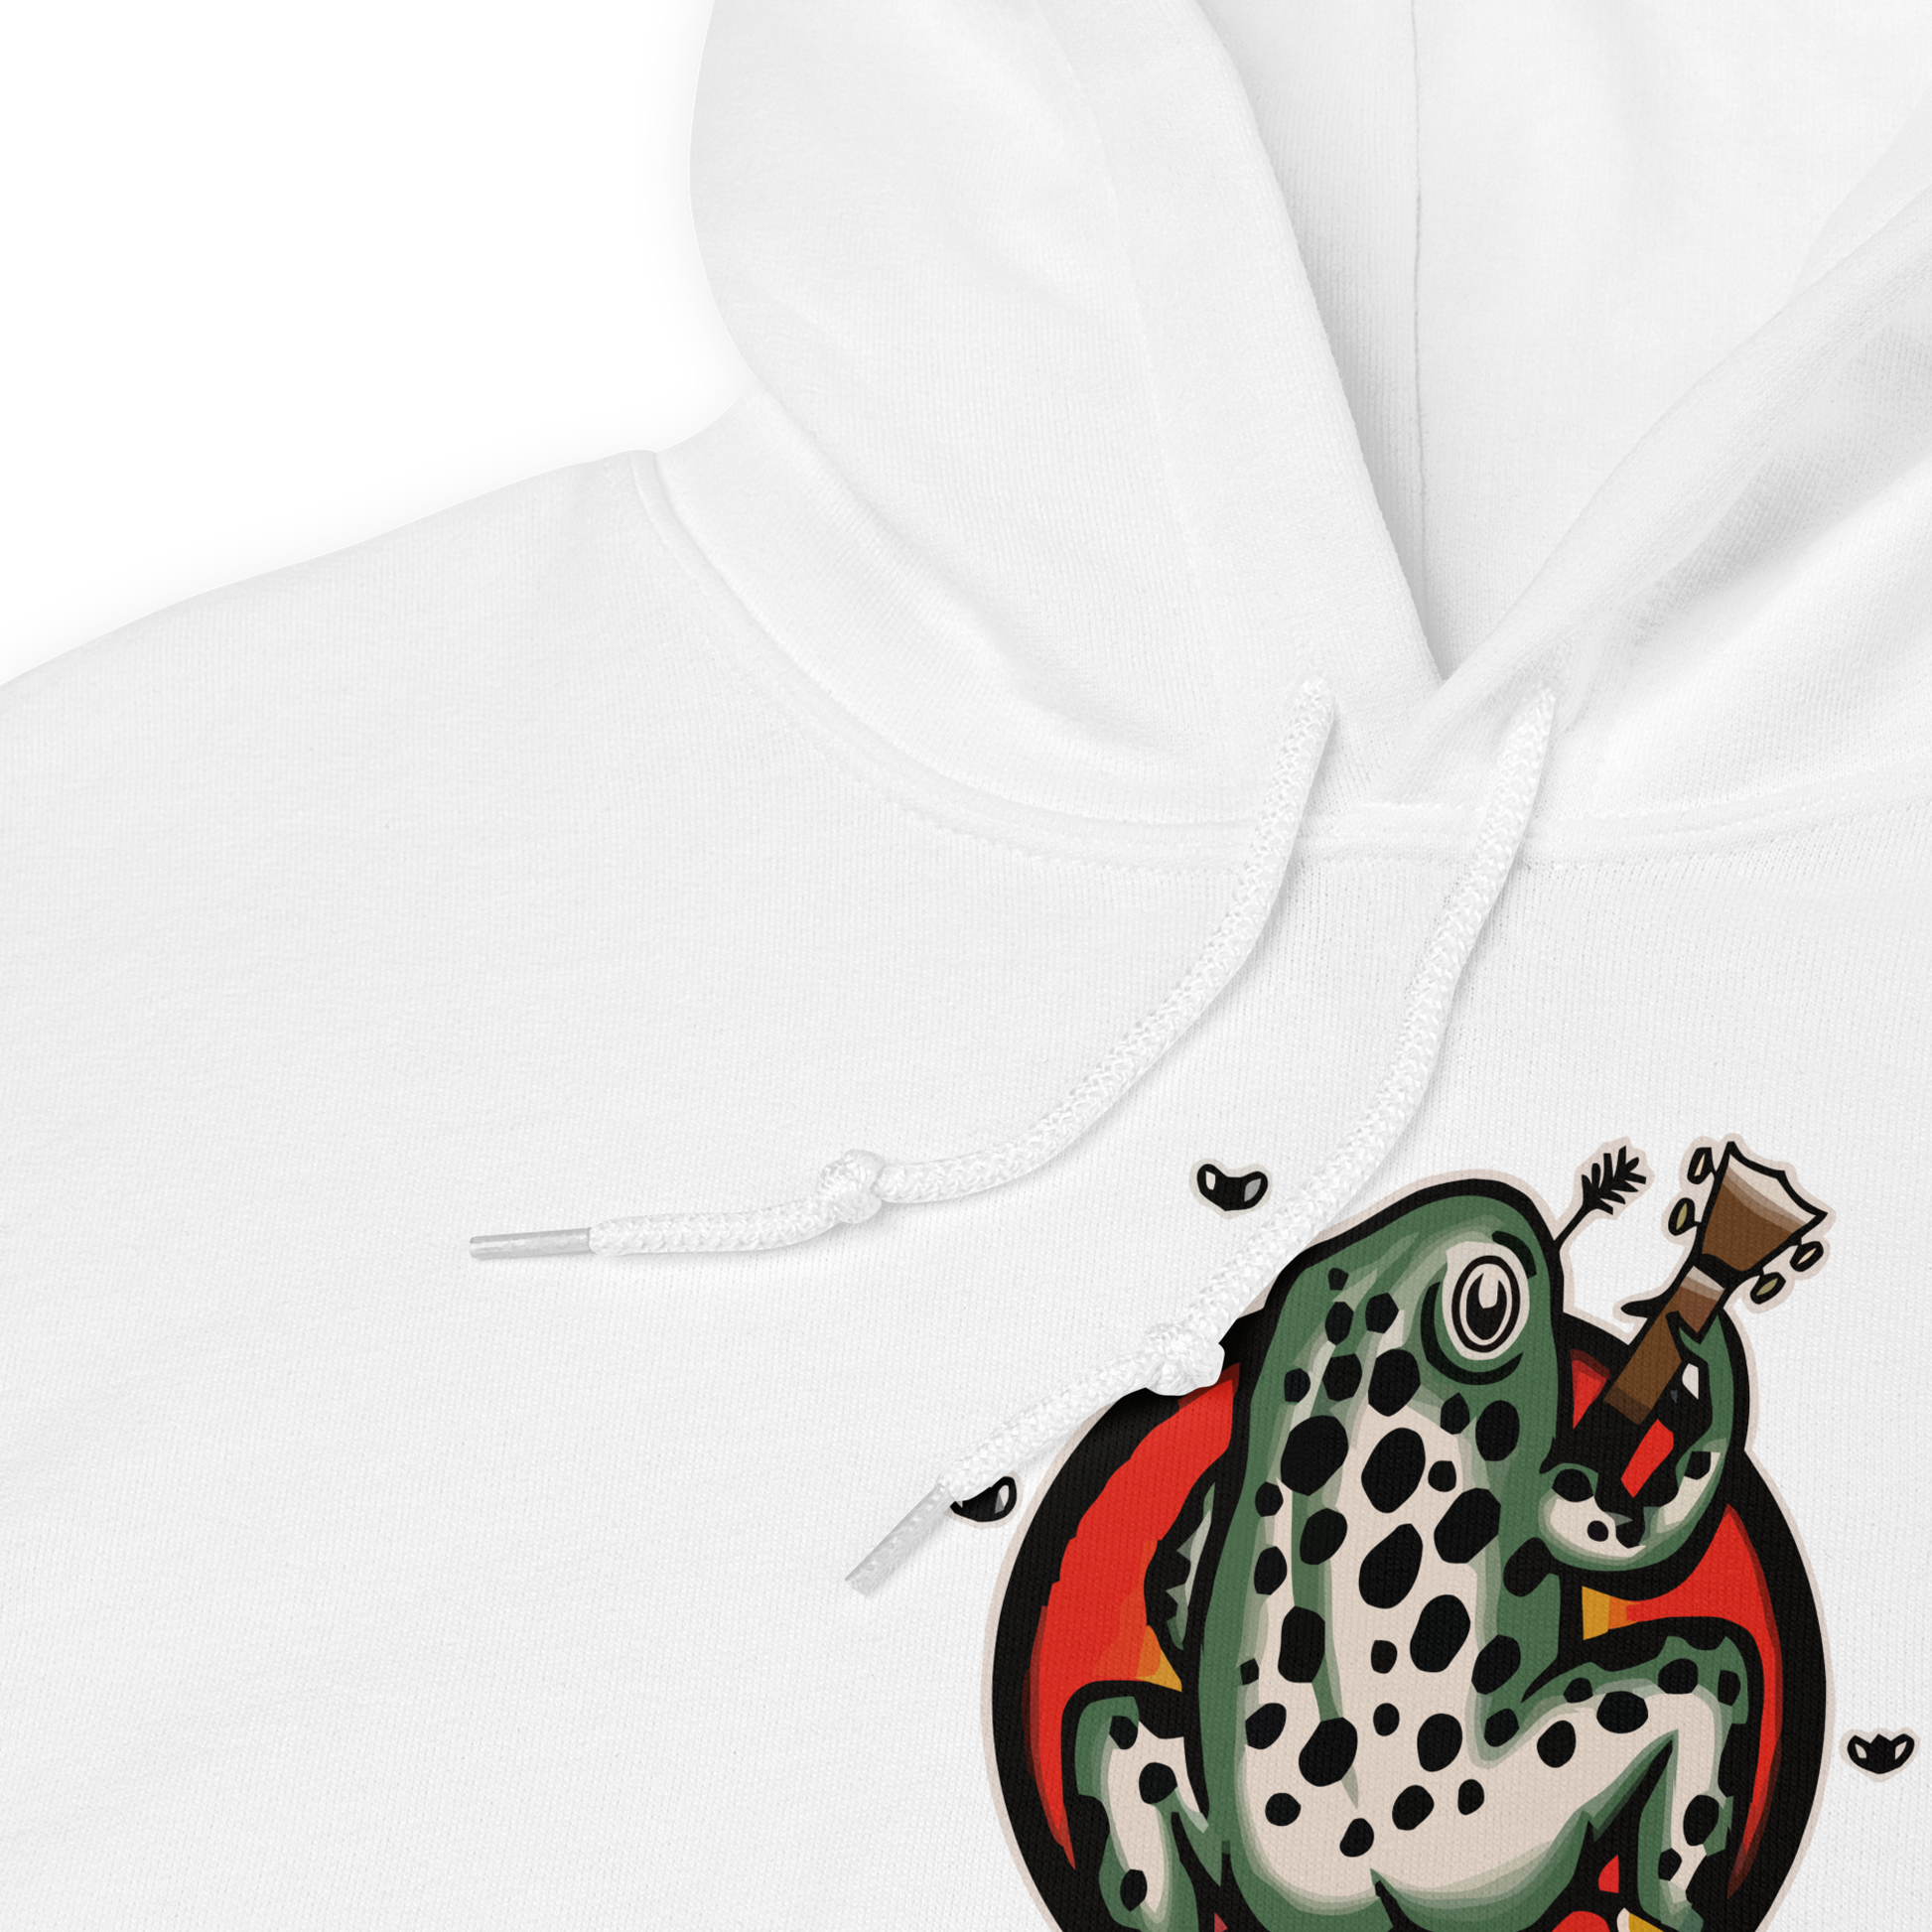 Product details of a white Frog Hoodie featuring the hilarious Frog 'n' Roll graphic on the chest - Funny Graphic Frog Hoodies - Boozy Fox